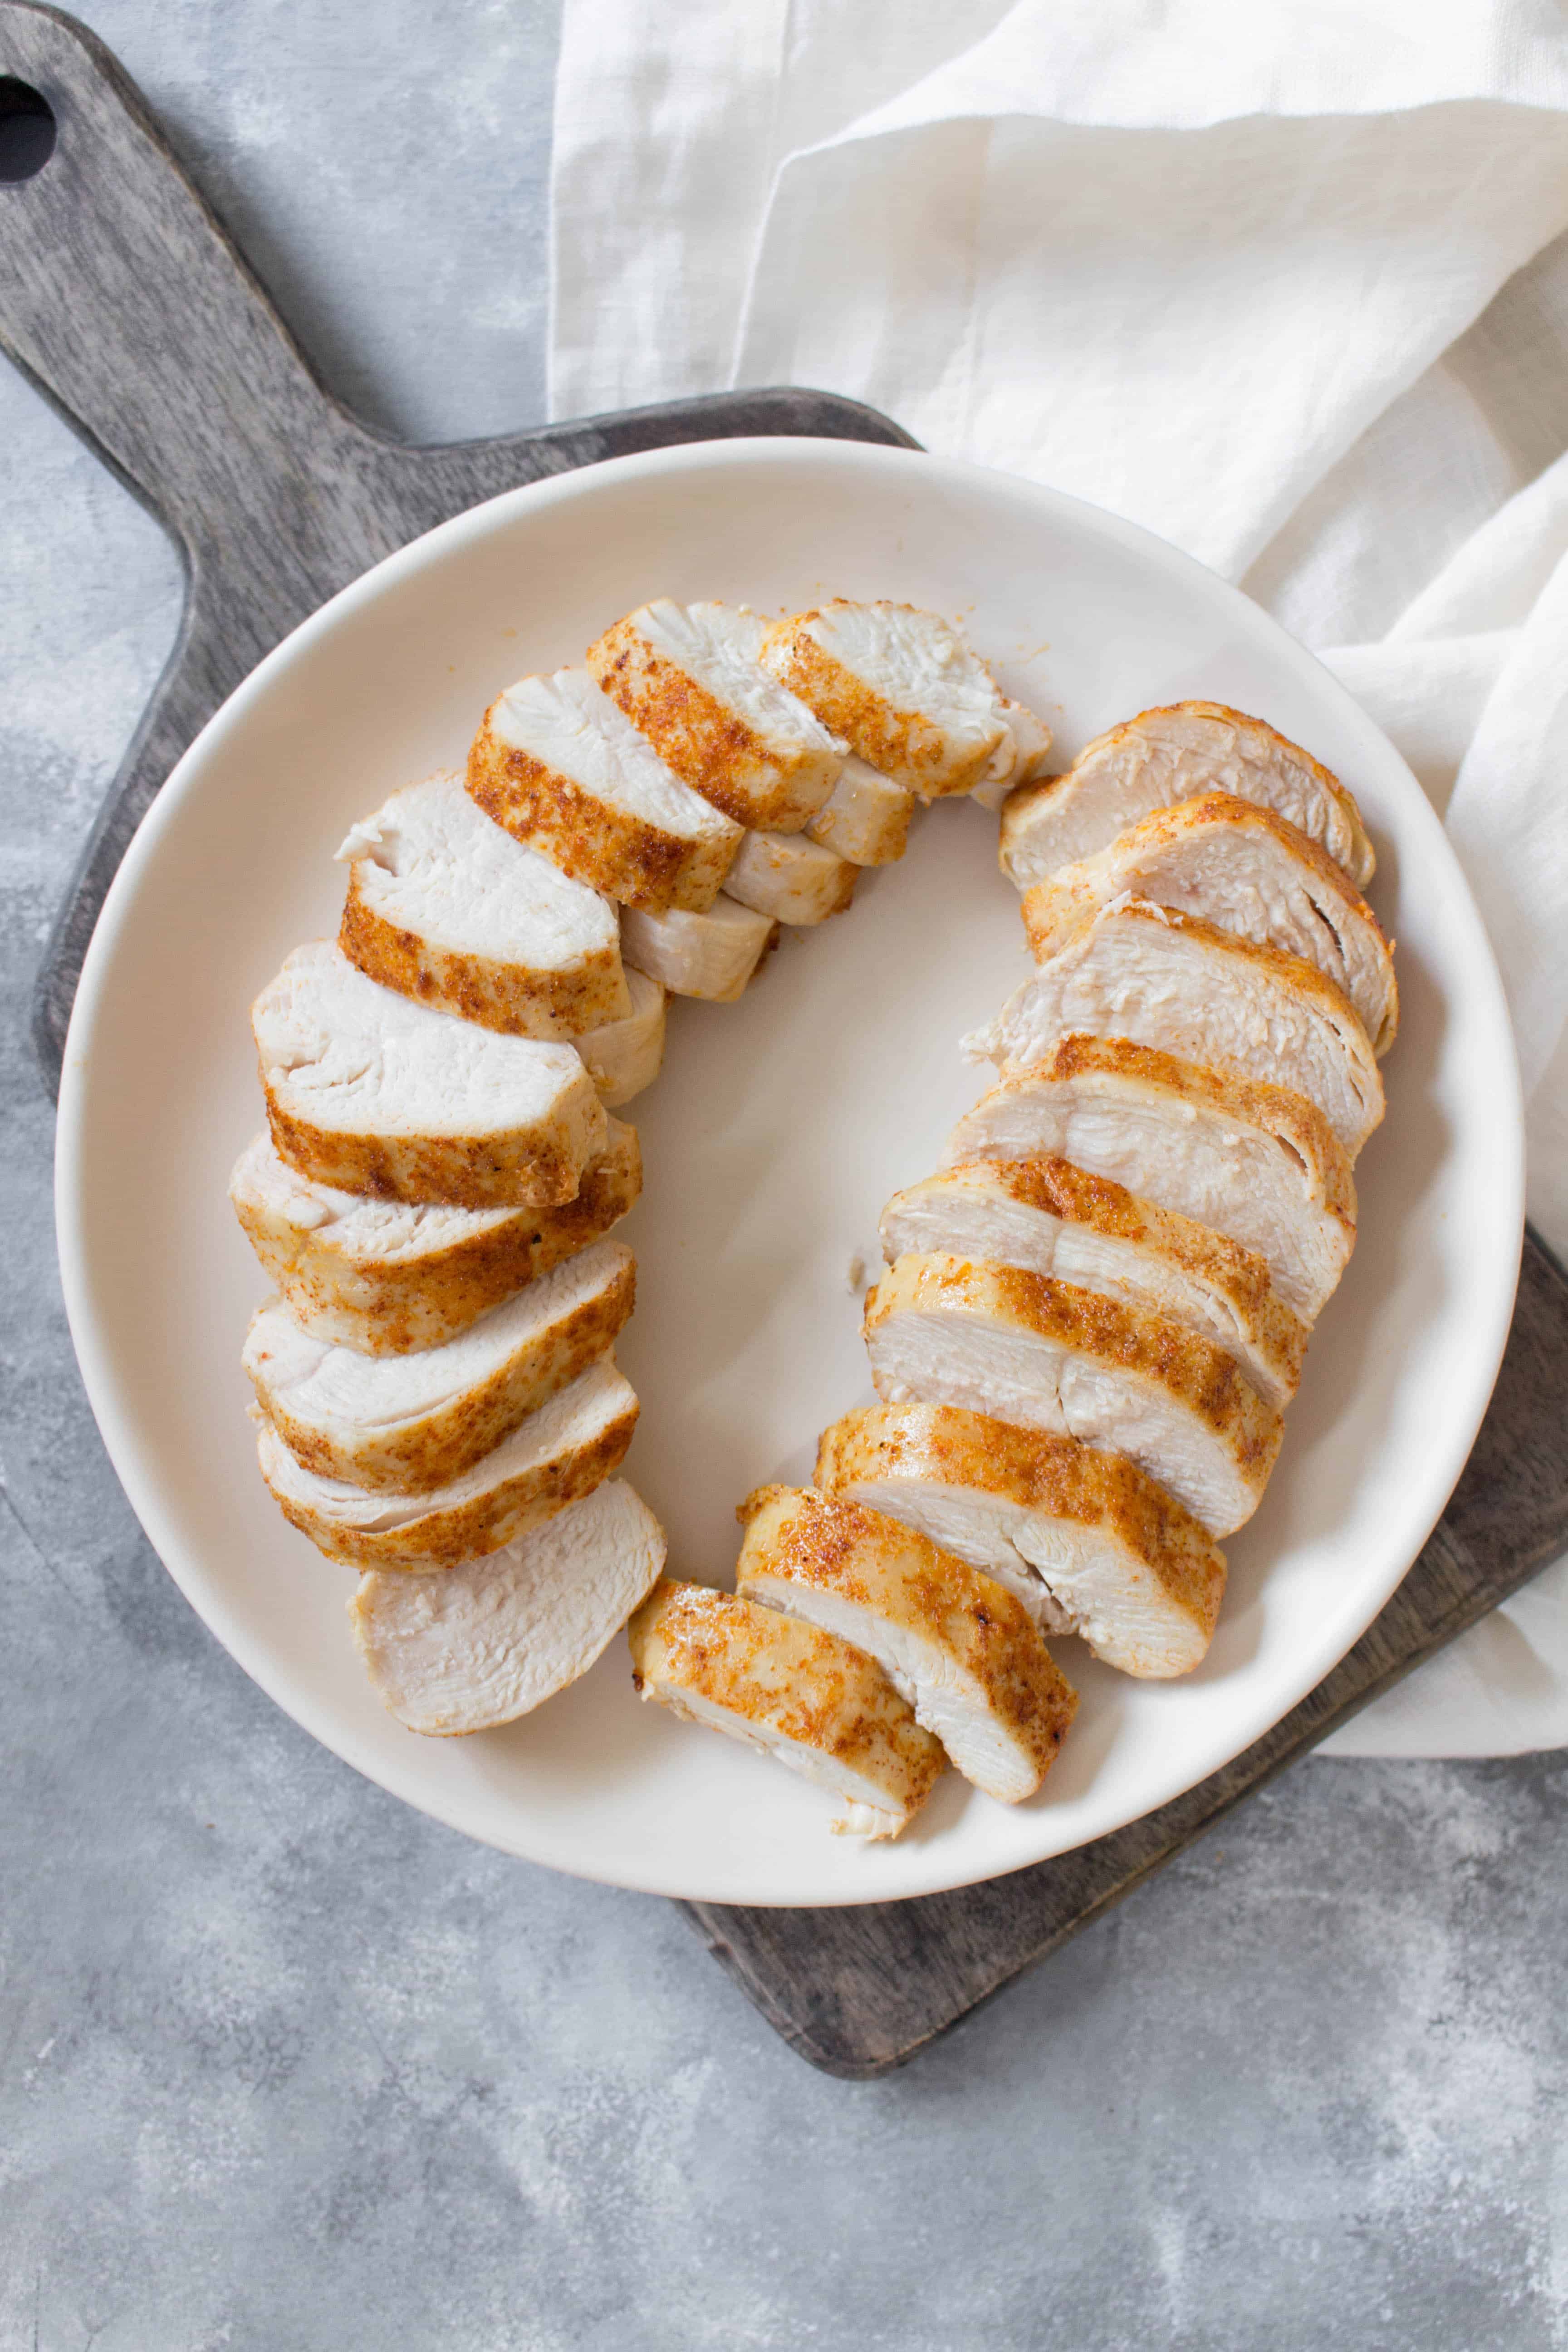 Curious as to how to make chicken breasts in your air fryer? Here is my basic air fryer chicken breasts recipe that takes under 15 minutes to make!